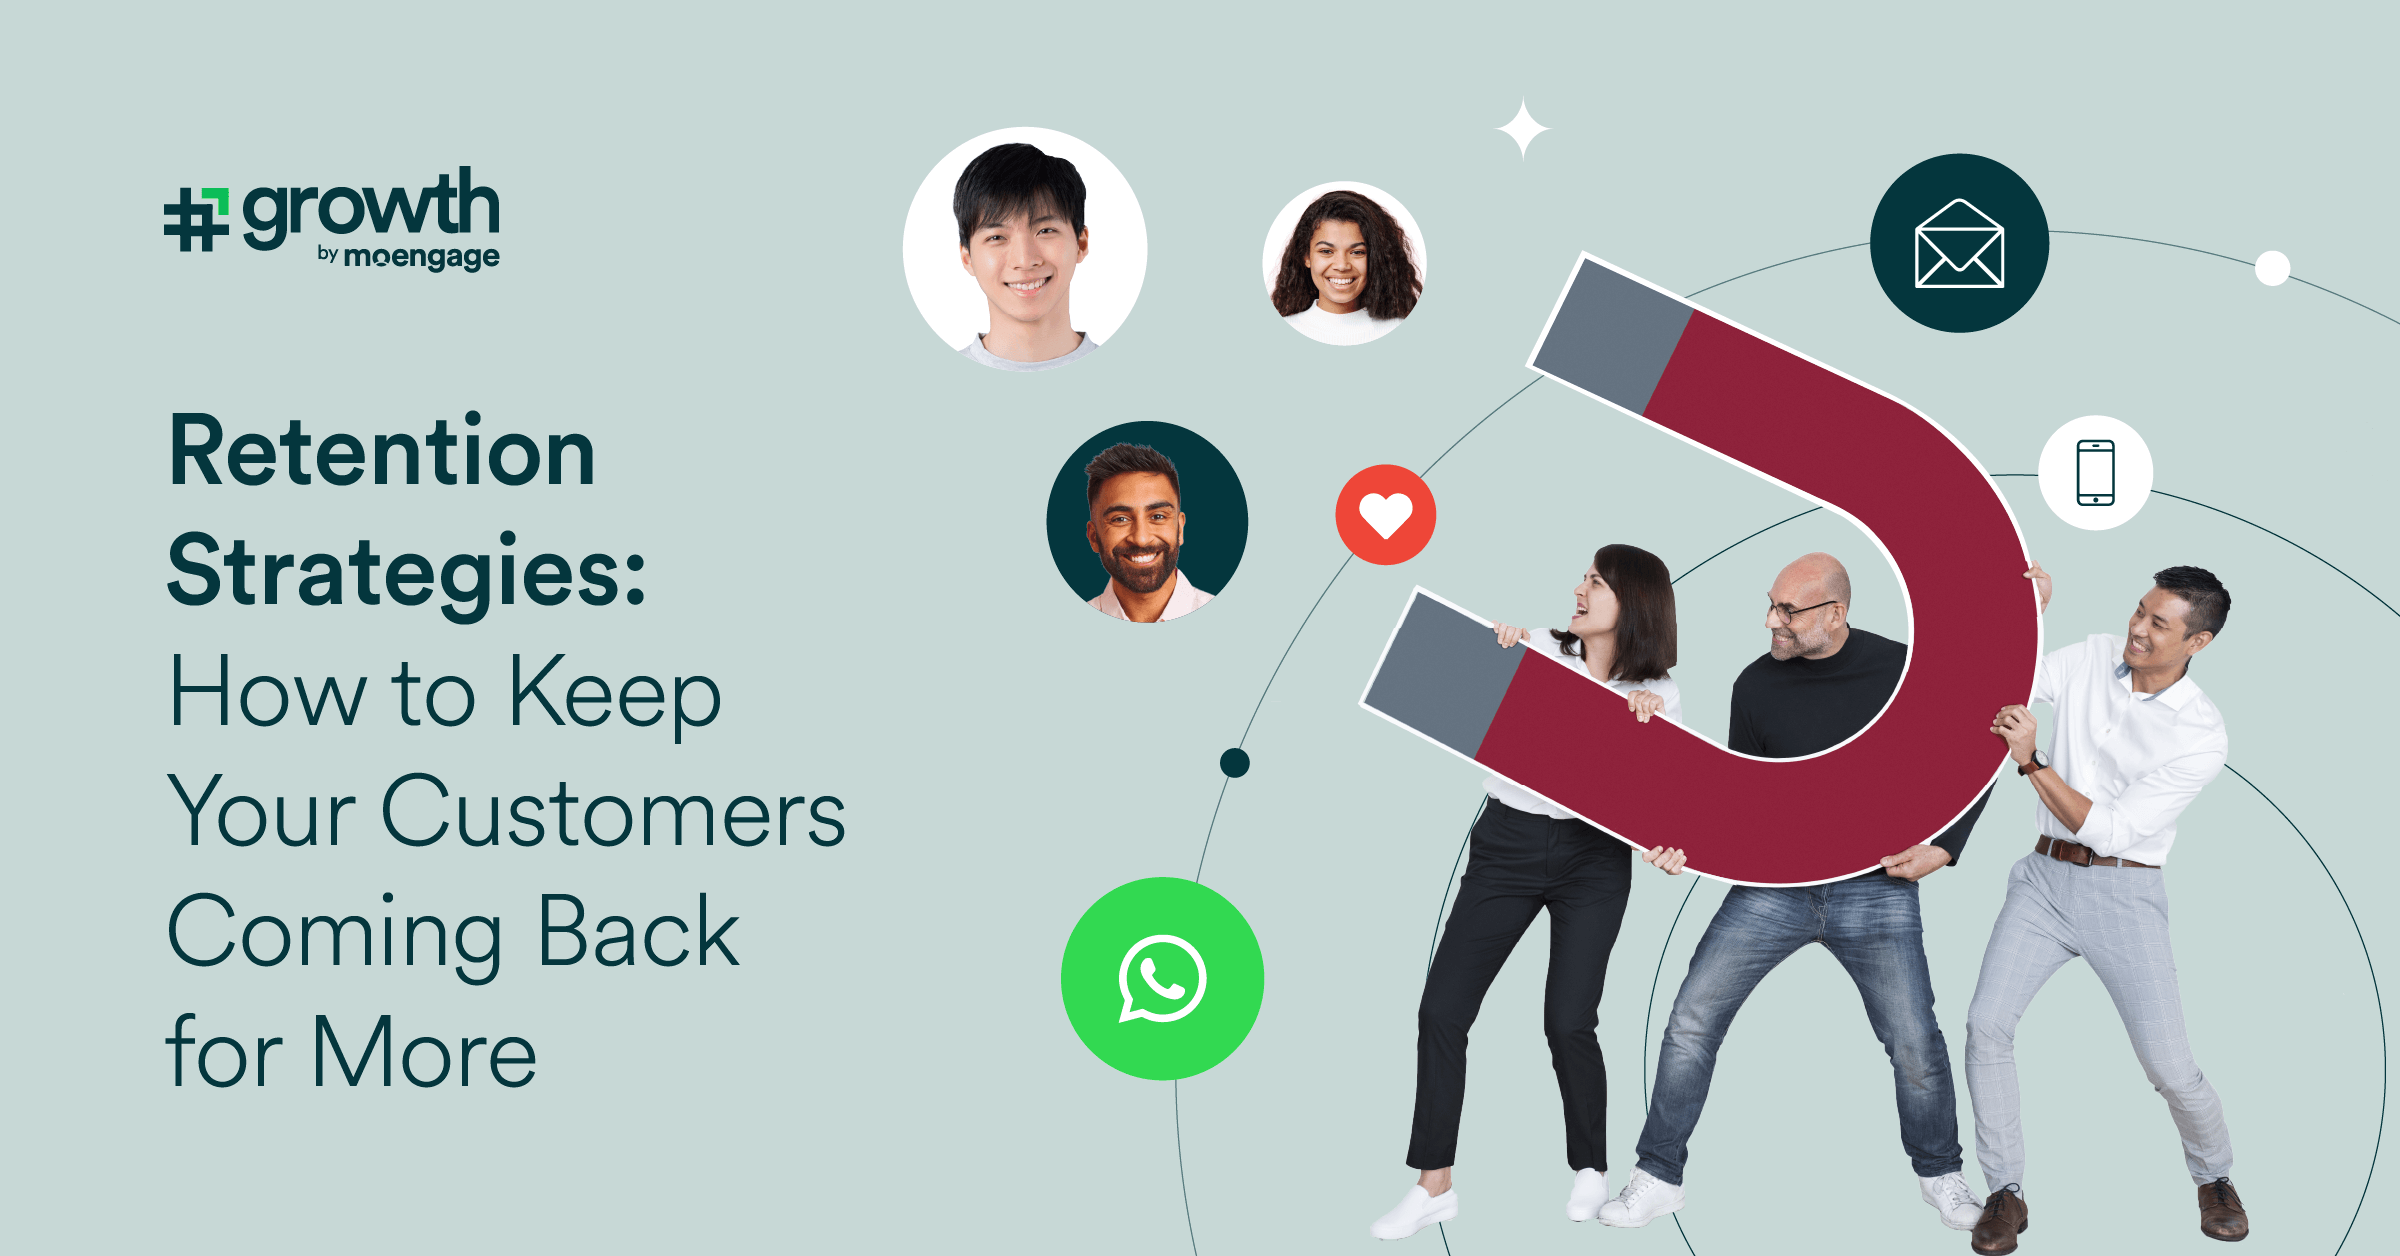 Retention Strategies: How to Keep Your Customers Coming Back for More